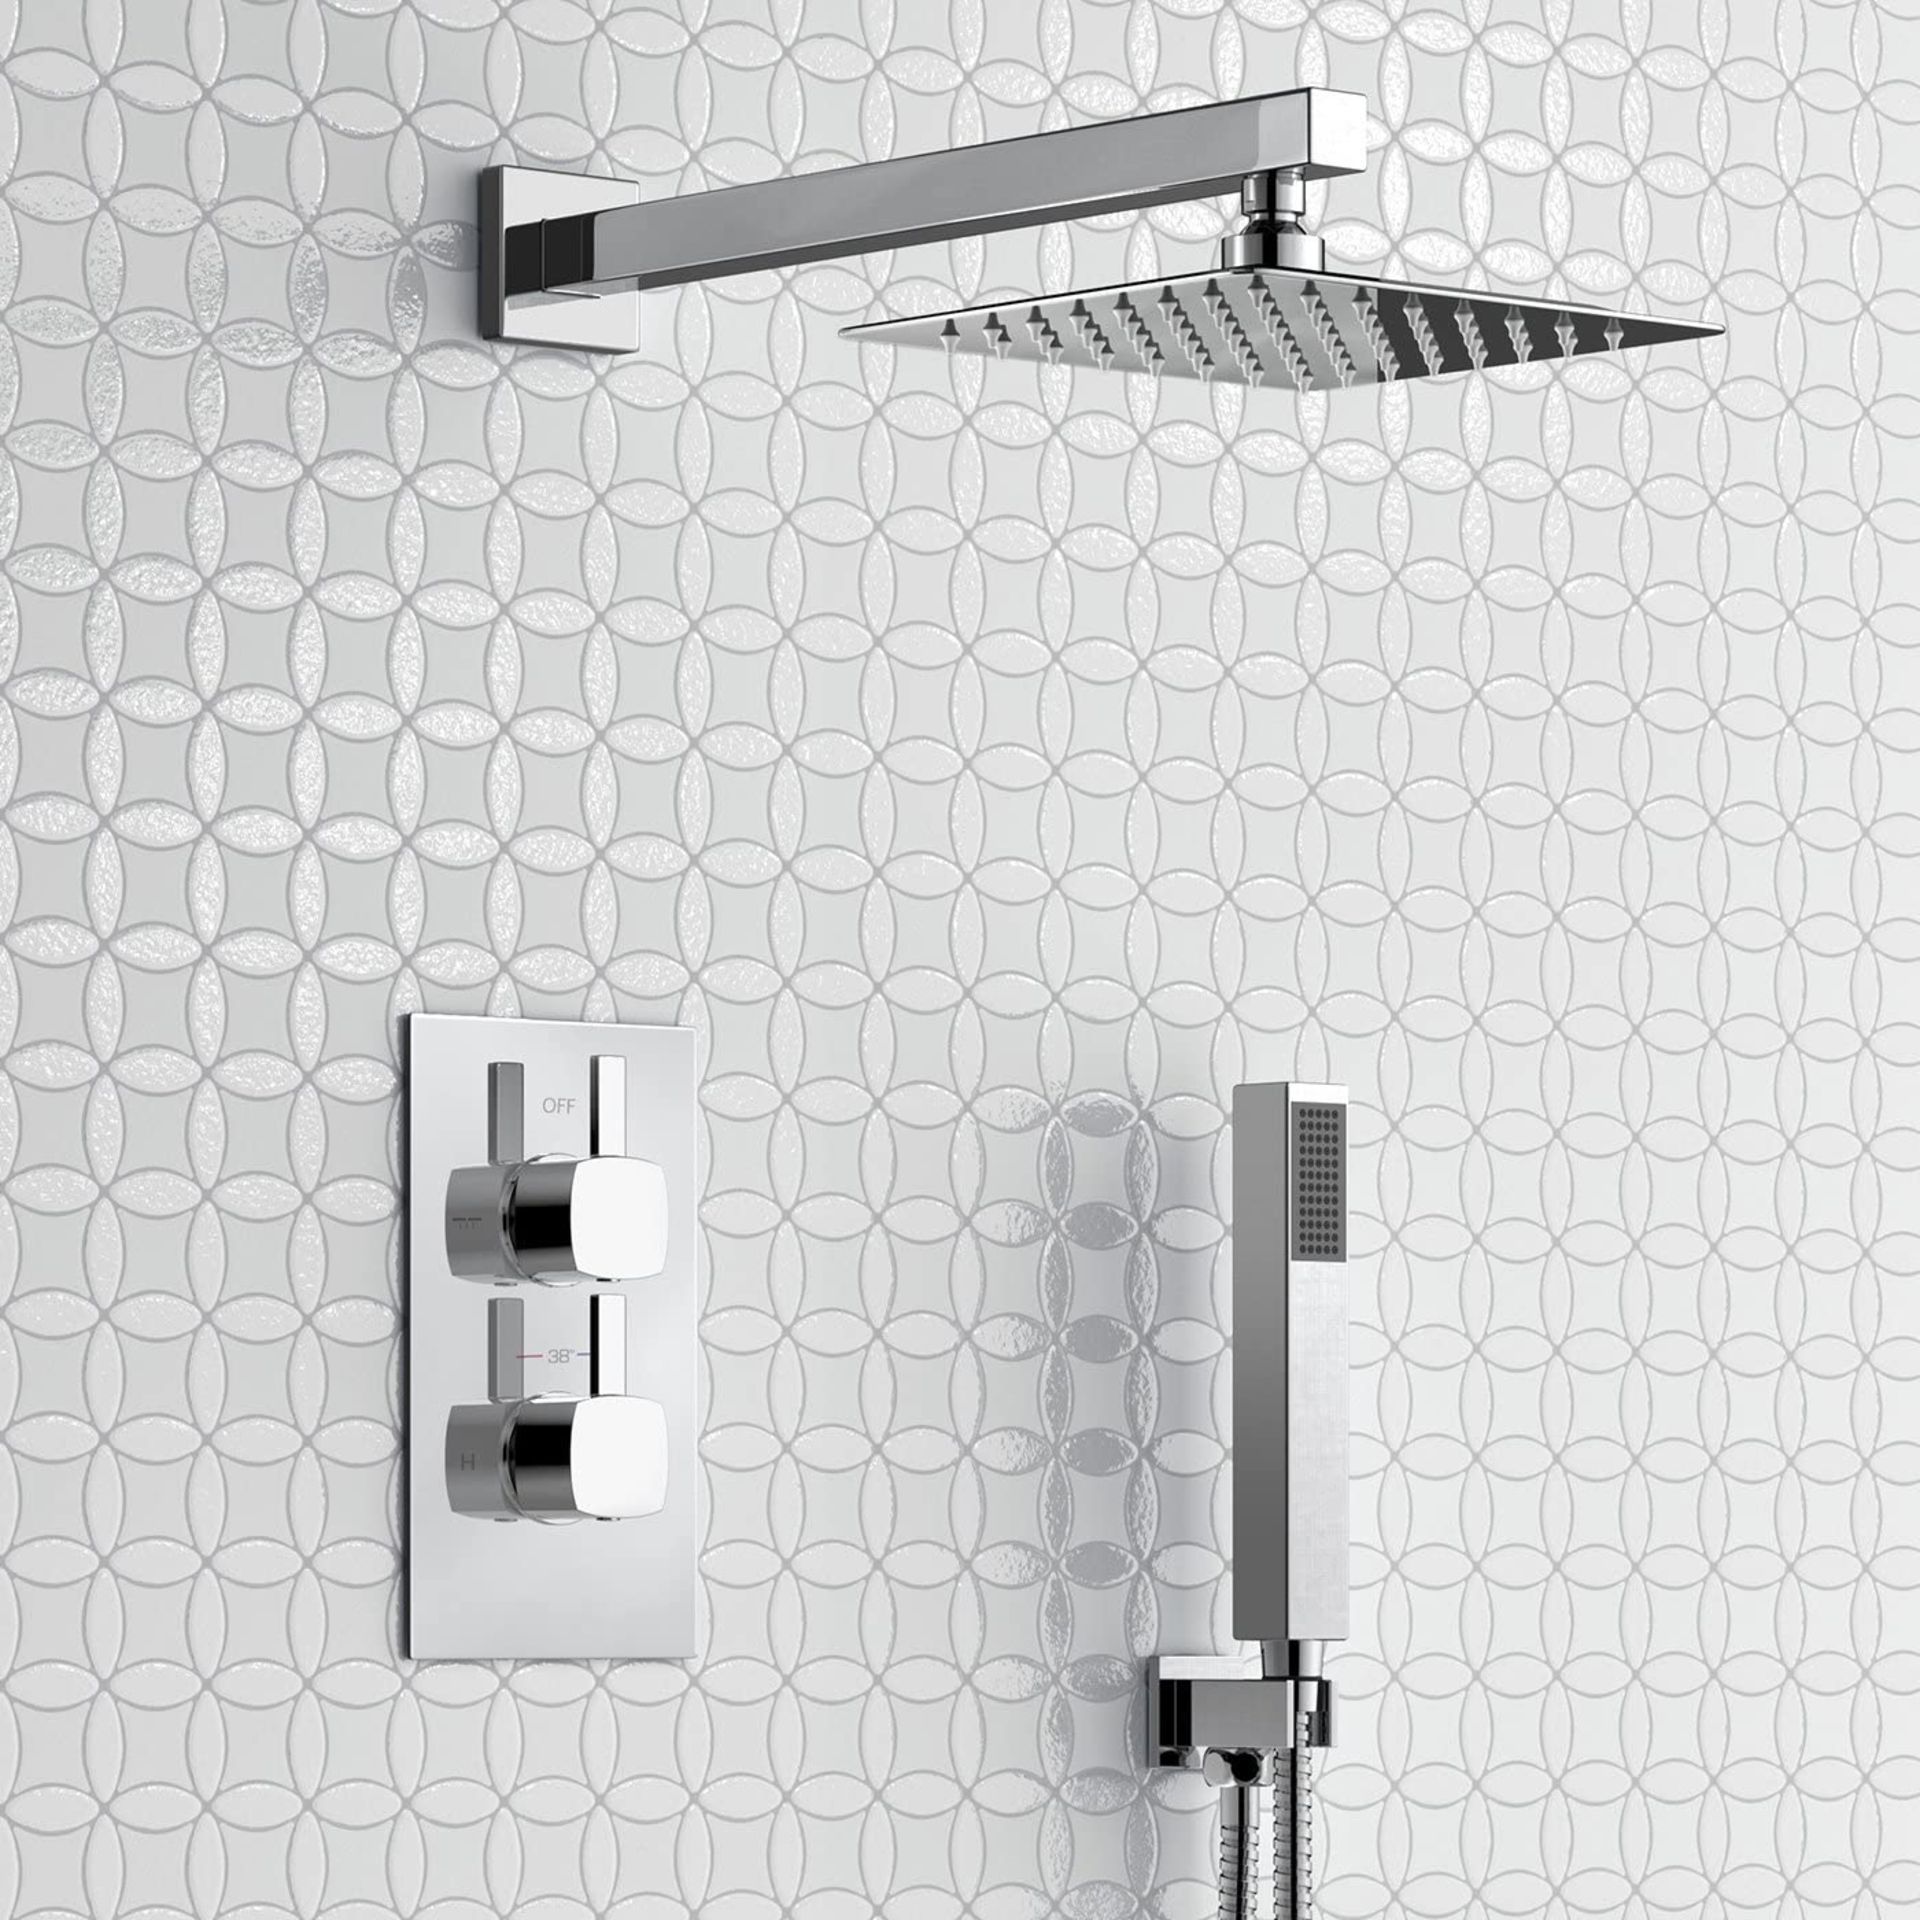 New & Boxed Thermostatic Concealed Mixer Shower Set 8 Inch Head Handset + Chrome 2 Way Valve Kit. - Image 2 of 2